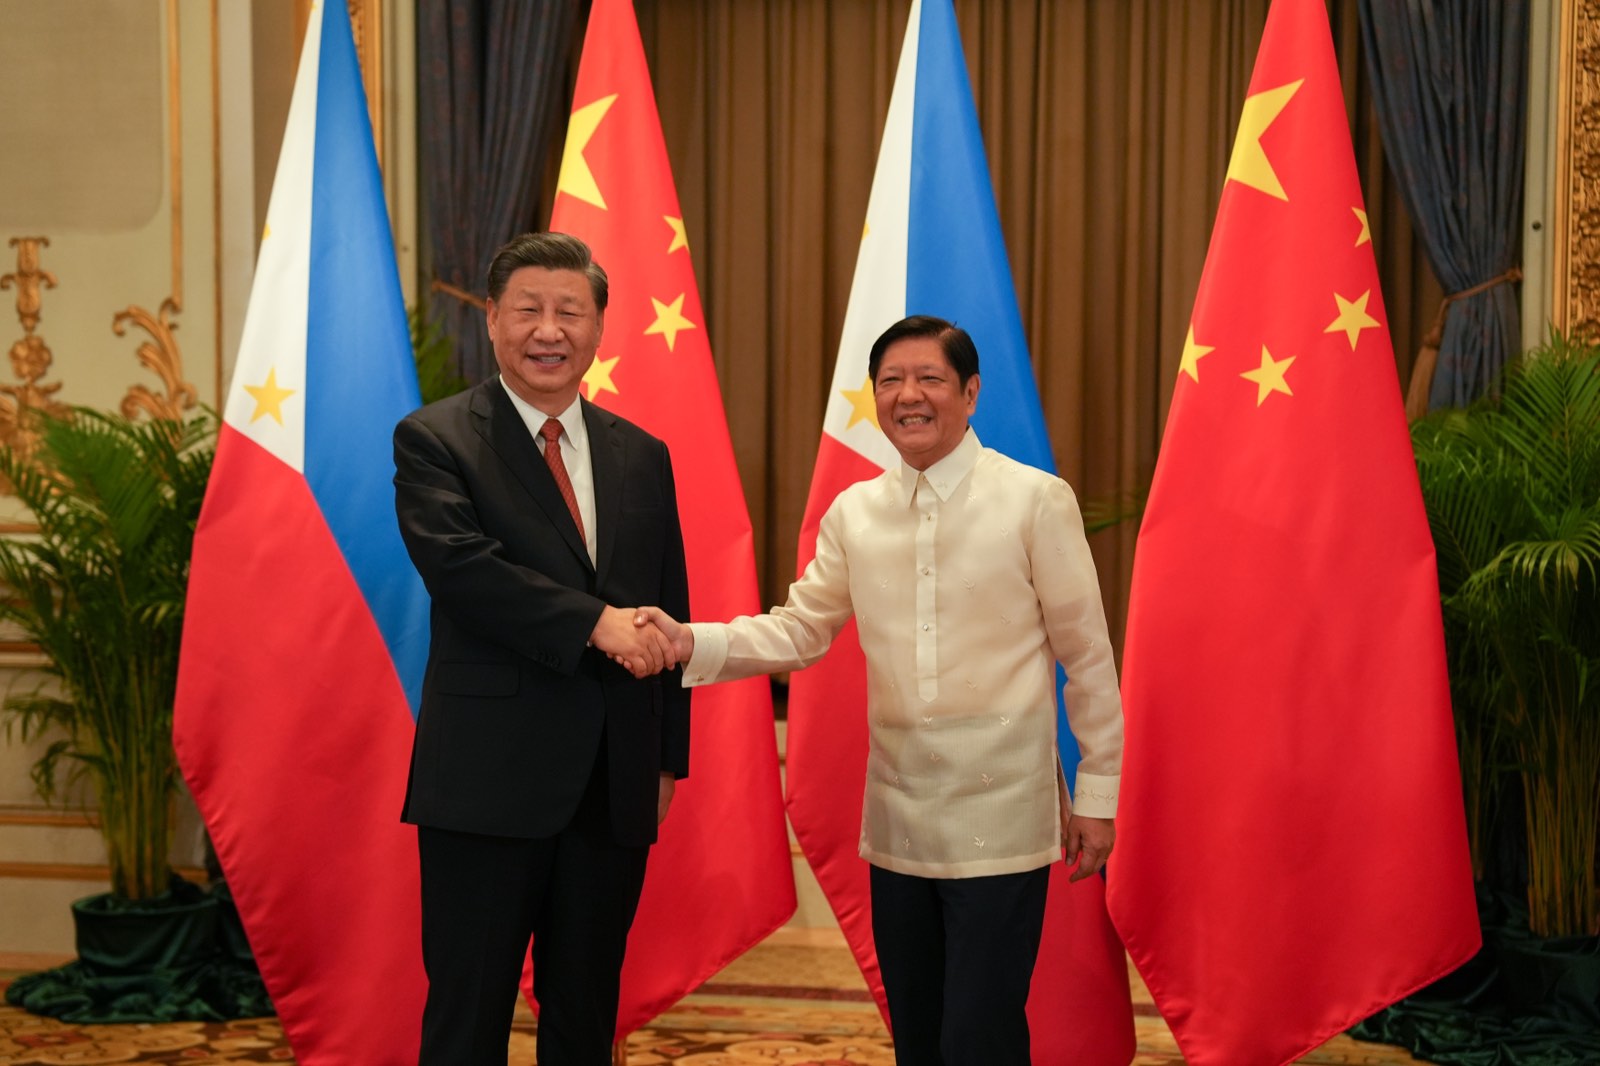 Easily a highlight of President Marcos’ attendance at this year’s Asia-Pacifific Economic Cooperation (Apec) summit in Bangkok is his meeting with Chinese President Xi Jinping on Thursday night. The Palace has yet to say if the South China Sea dispute was discussed.